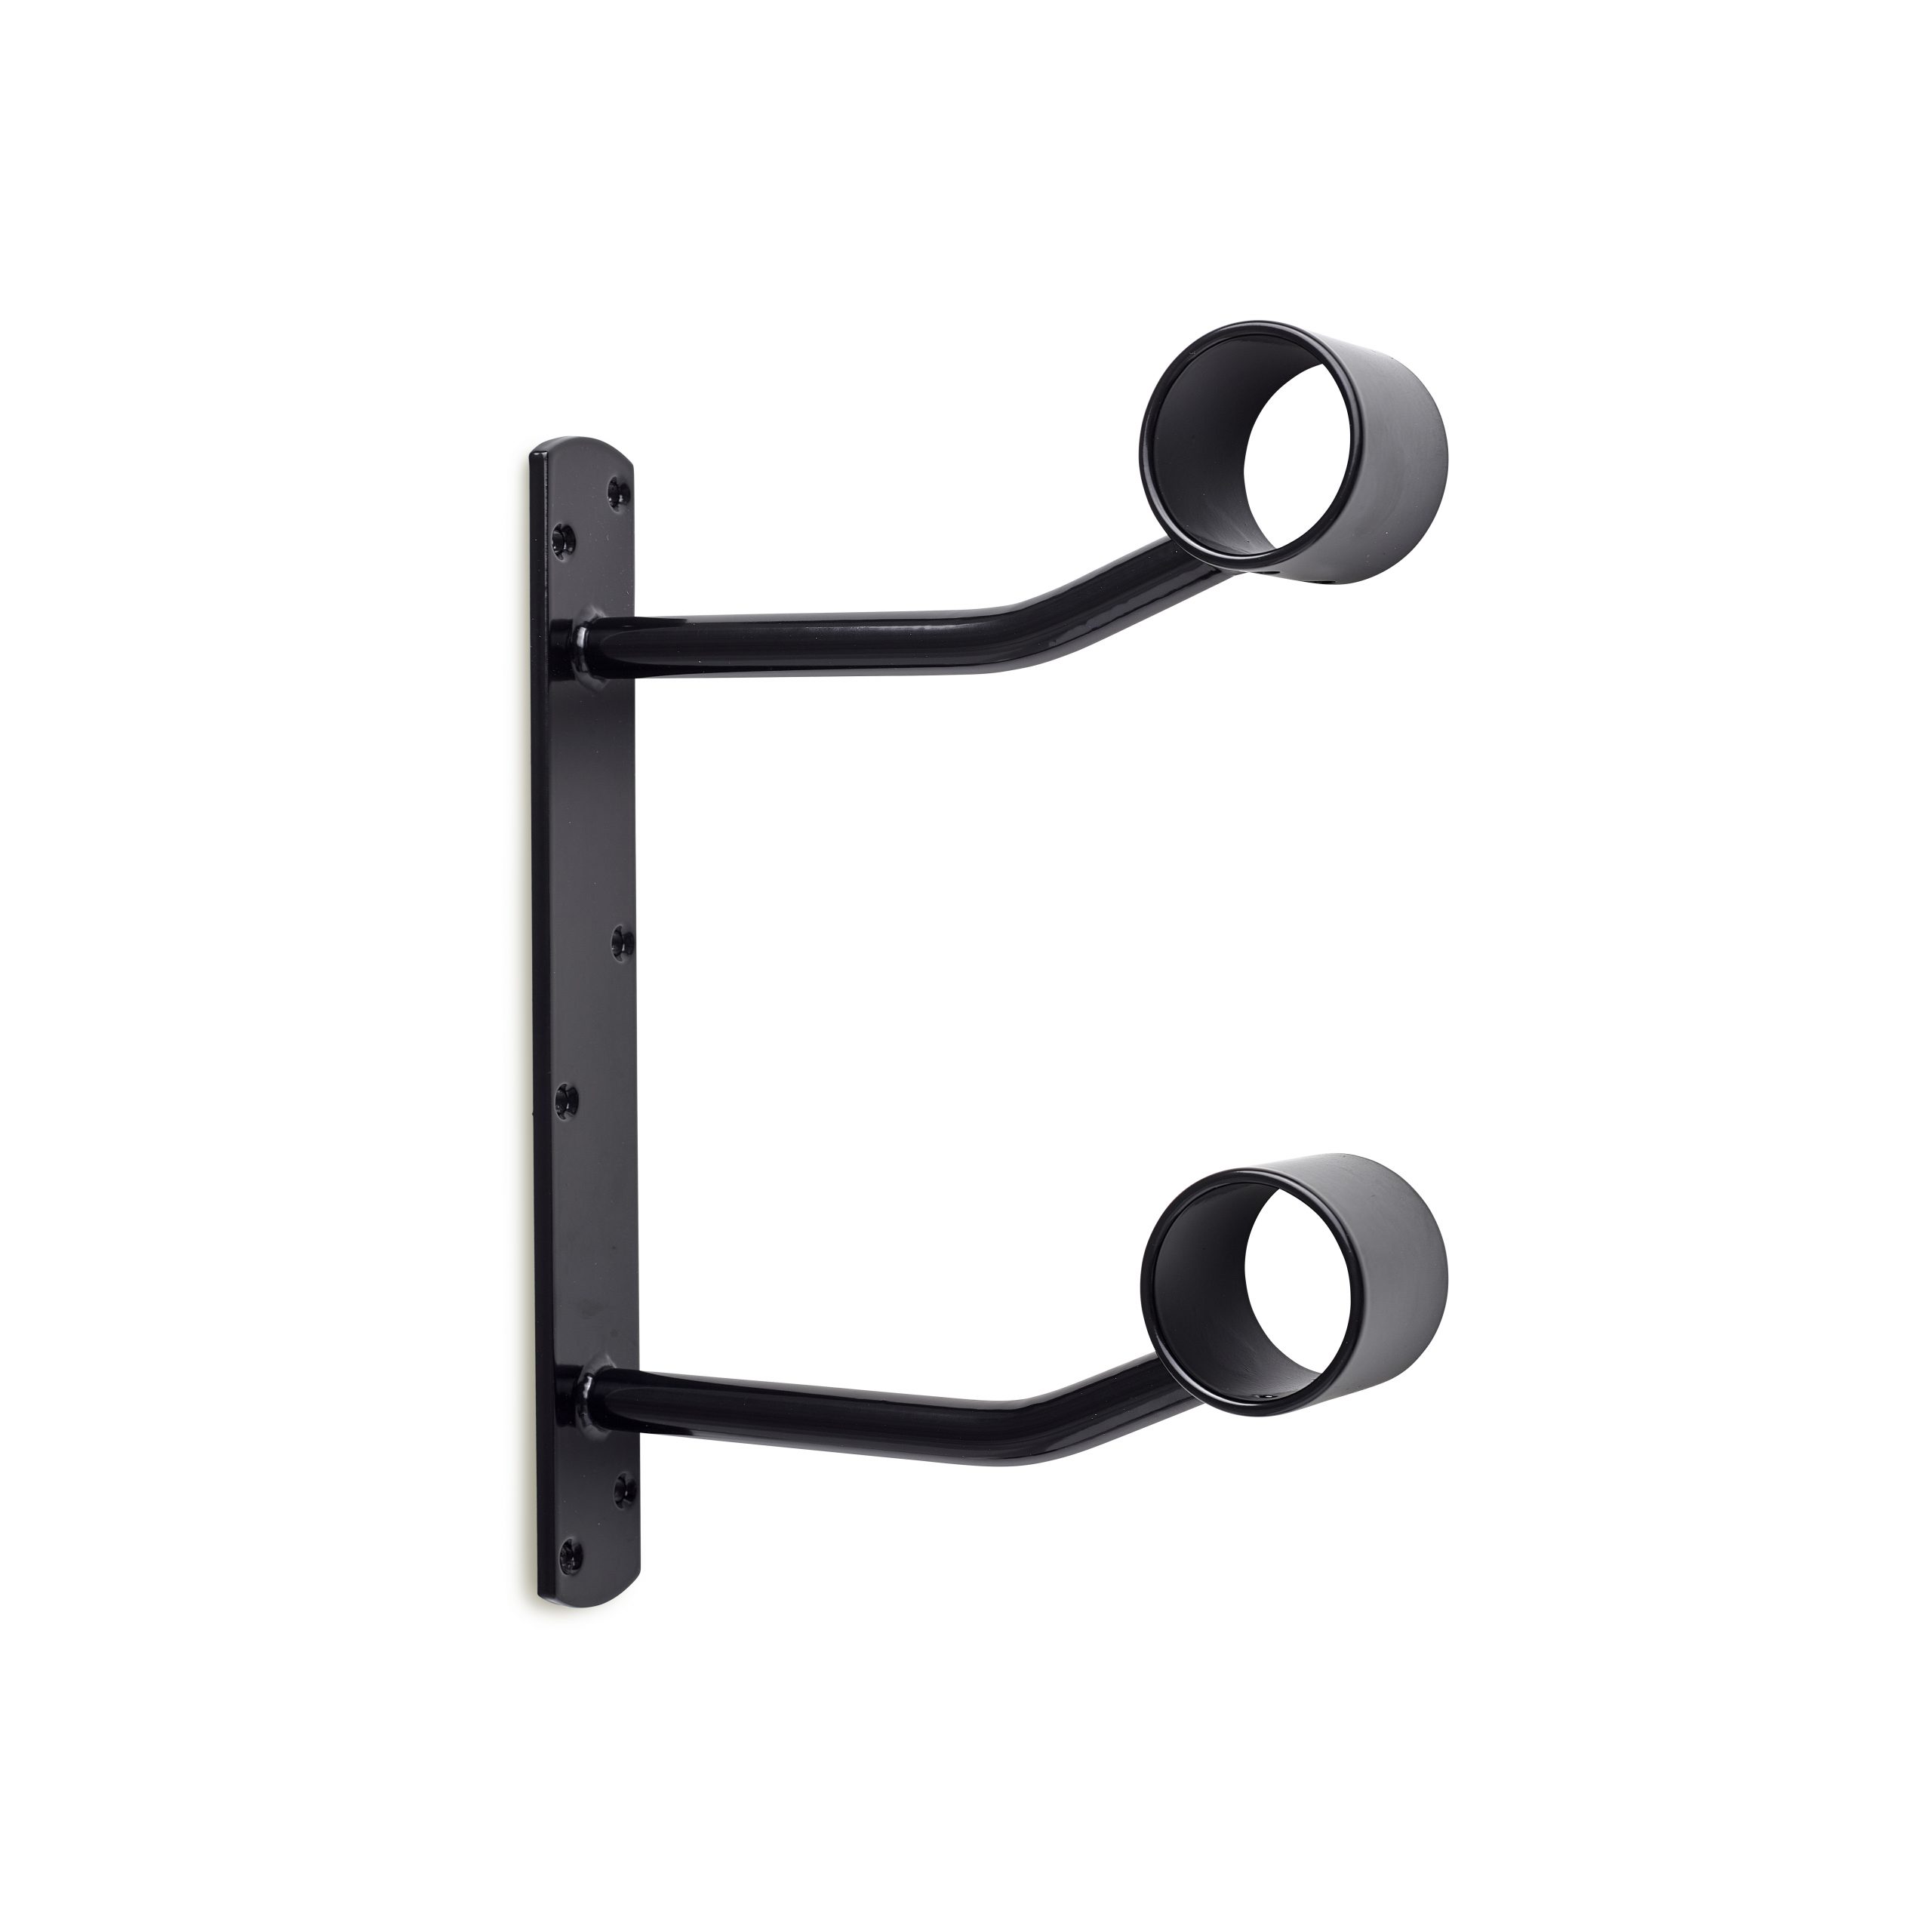 Harlequin Double, Square, Black, Wall-Mounted Ballet Barre Bracket